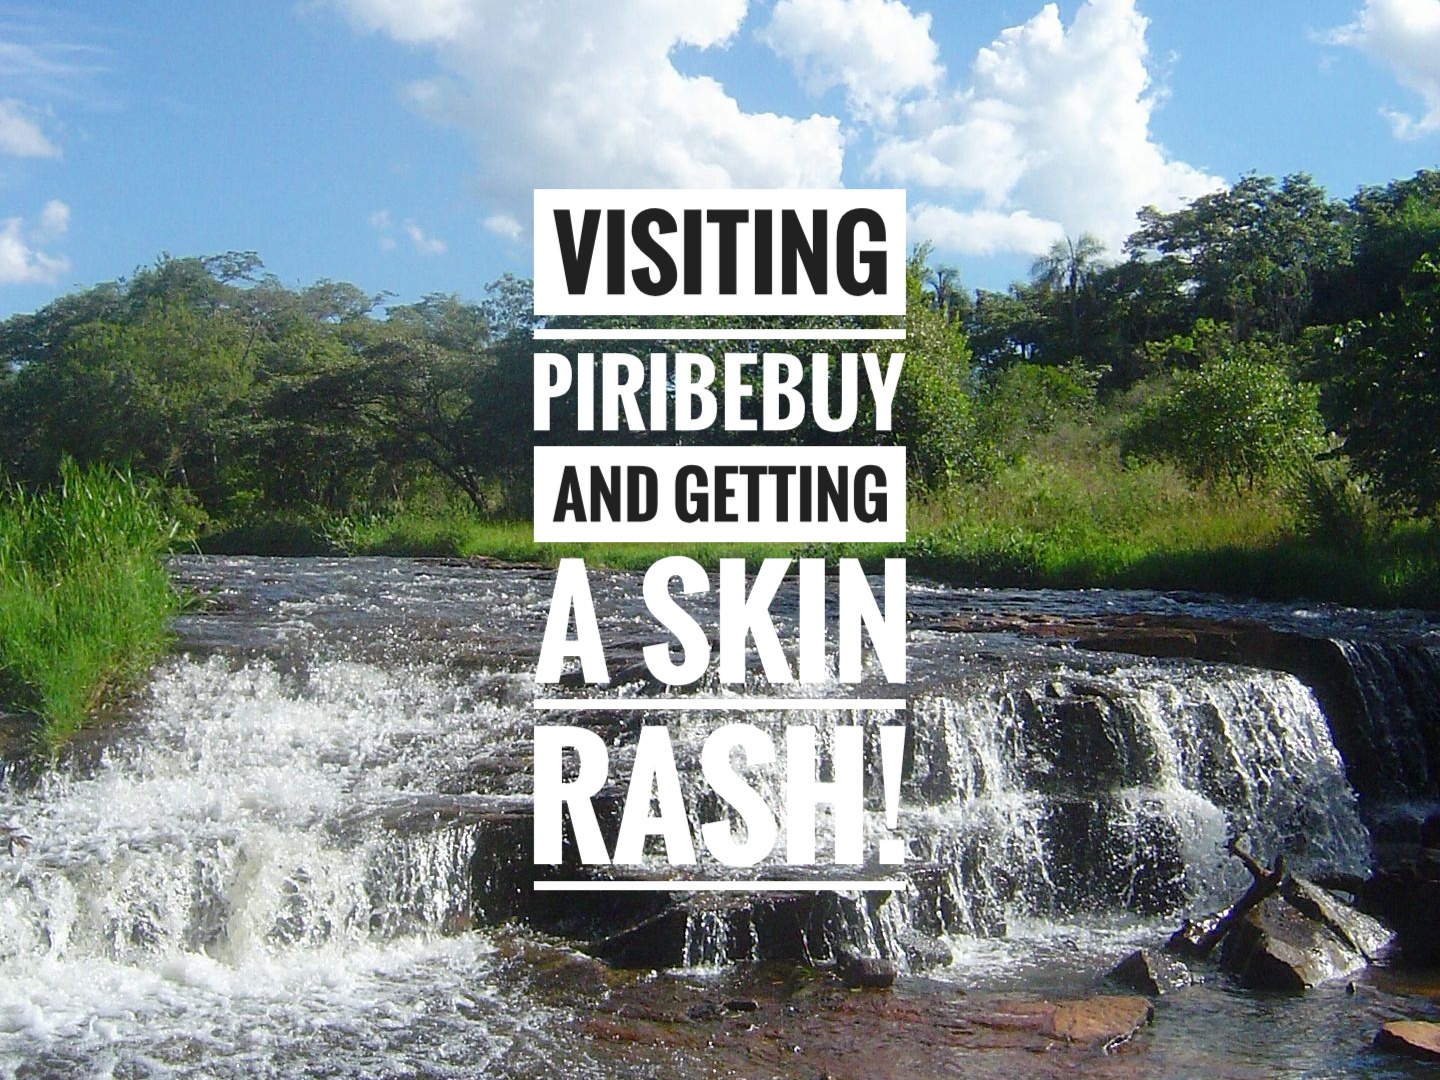 Read about the small little village of Piribebuy in Paraguay! Find out about a mysterious pyramid which happens to be one of the local Treasures Of Traveling.